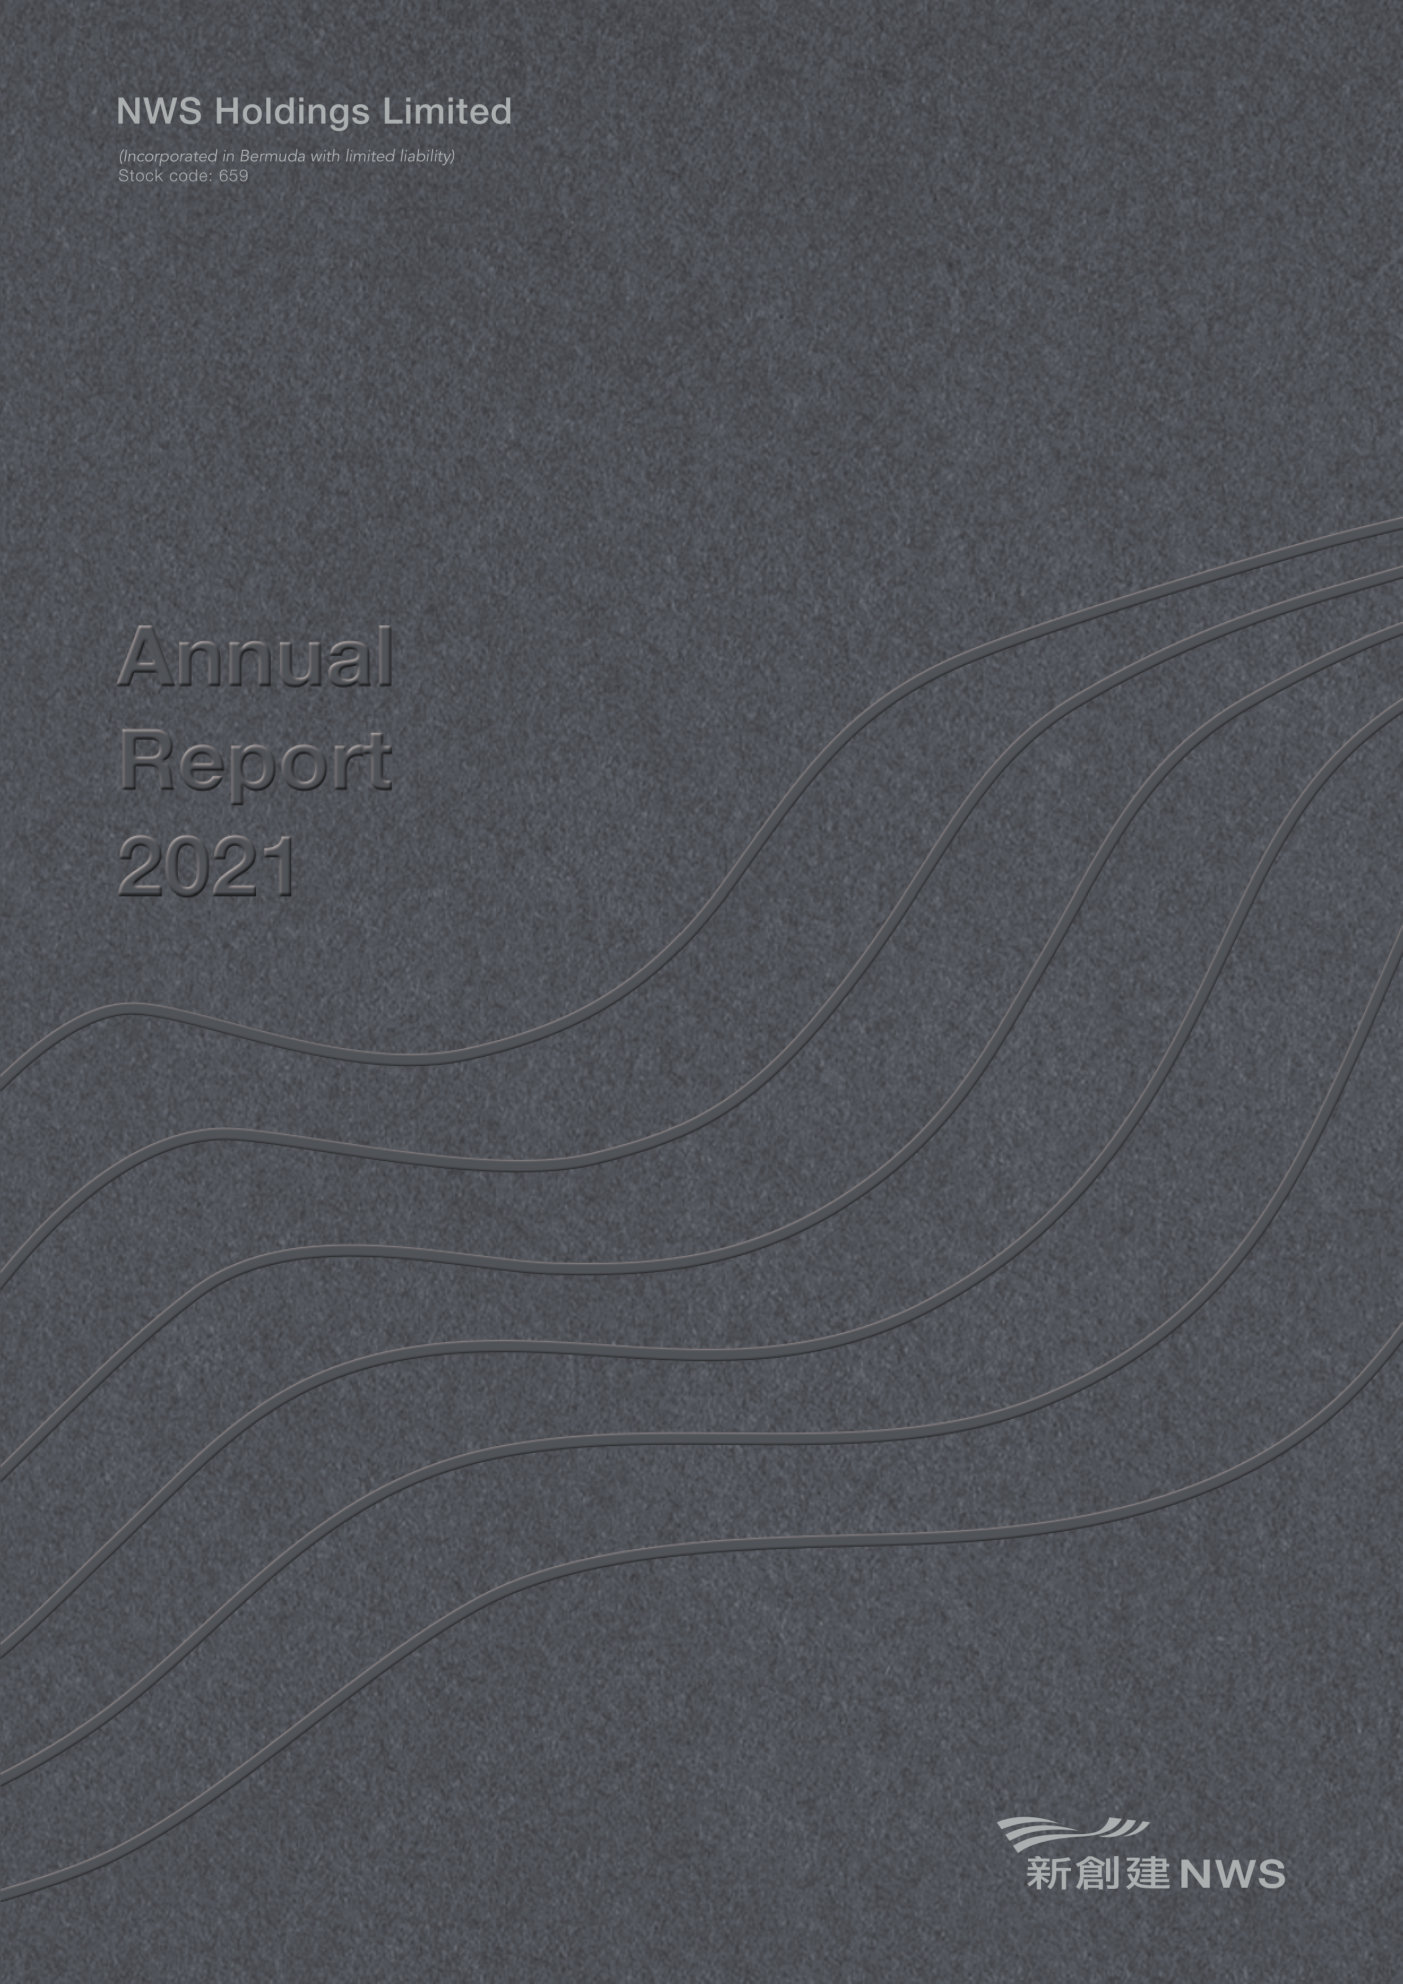 annual report awards, annual report competition, annual reports